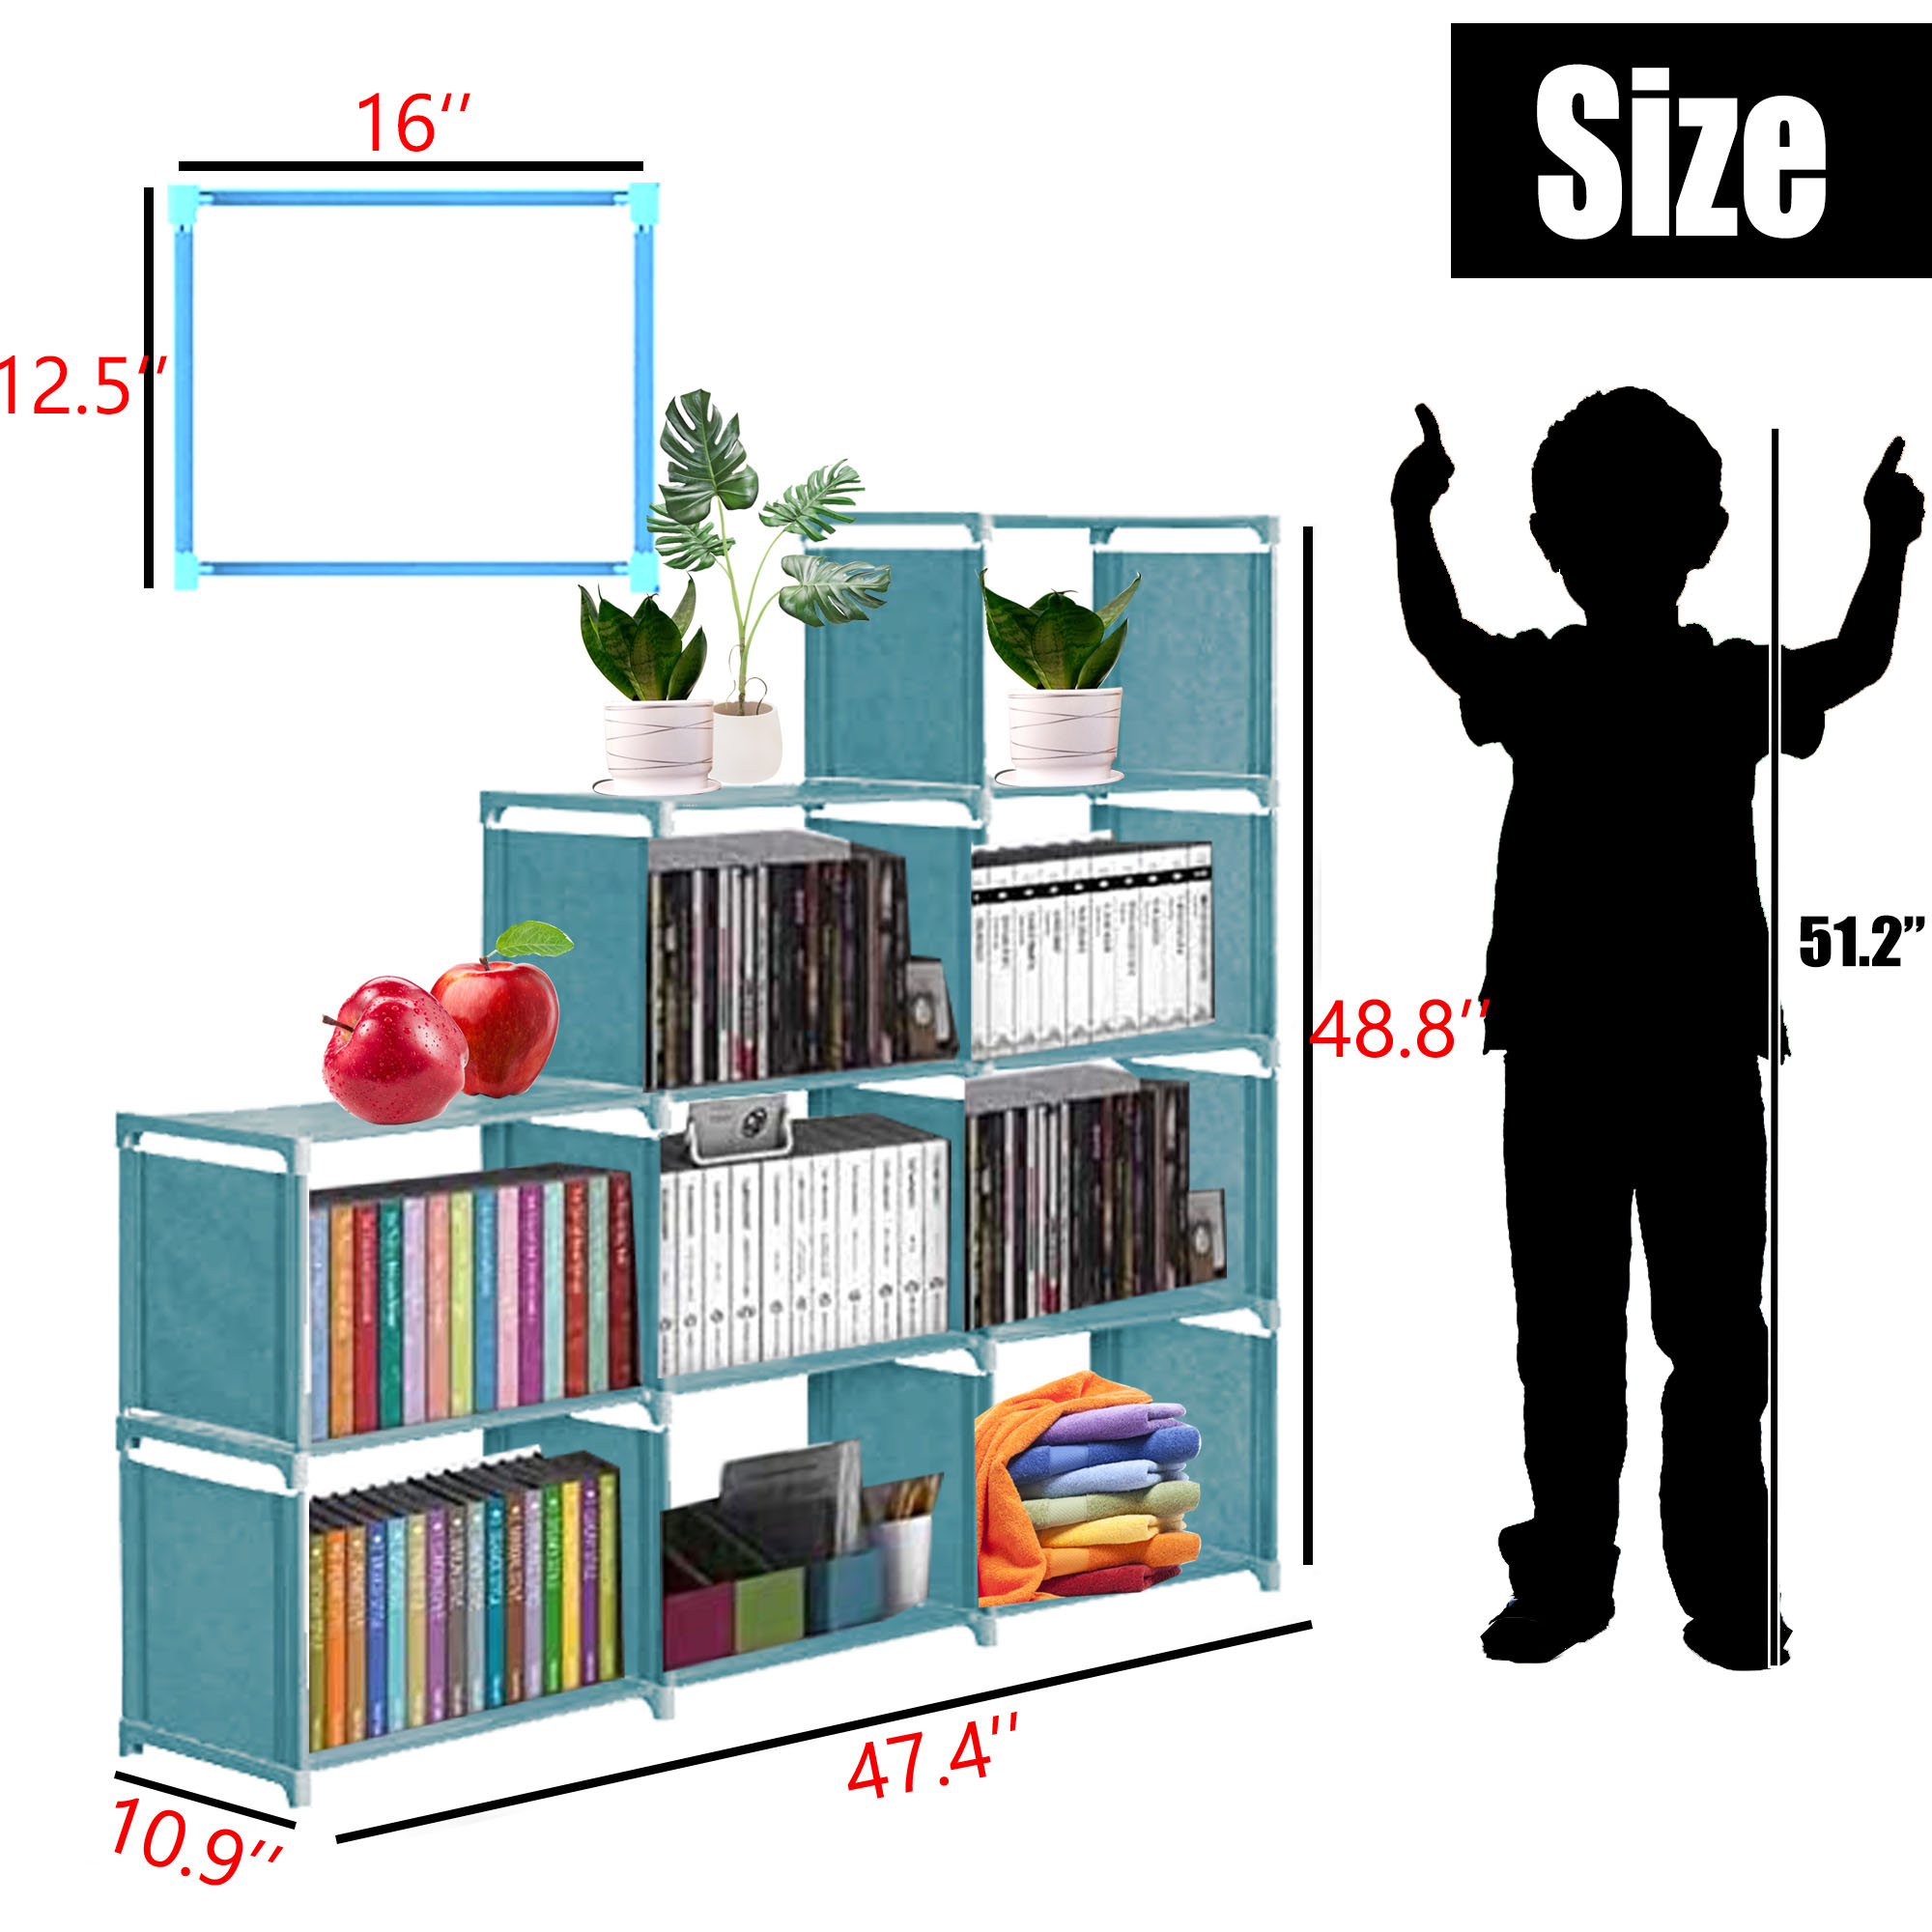 Qhomic Kid Adjustable Bookcase Storage Bookshelf with 9 Cube Book Shelves For Kids Adult, Blue - image 4 of 9